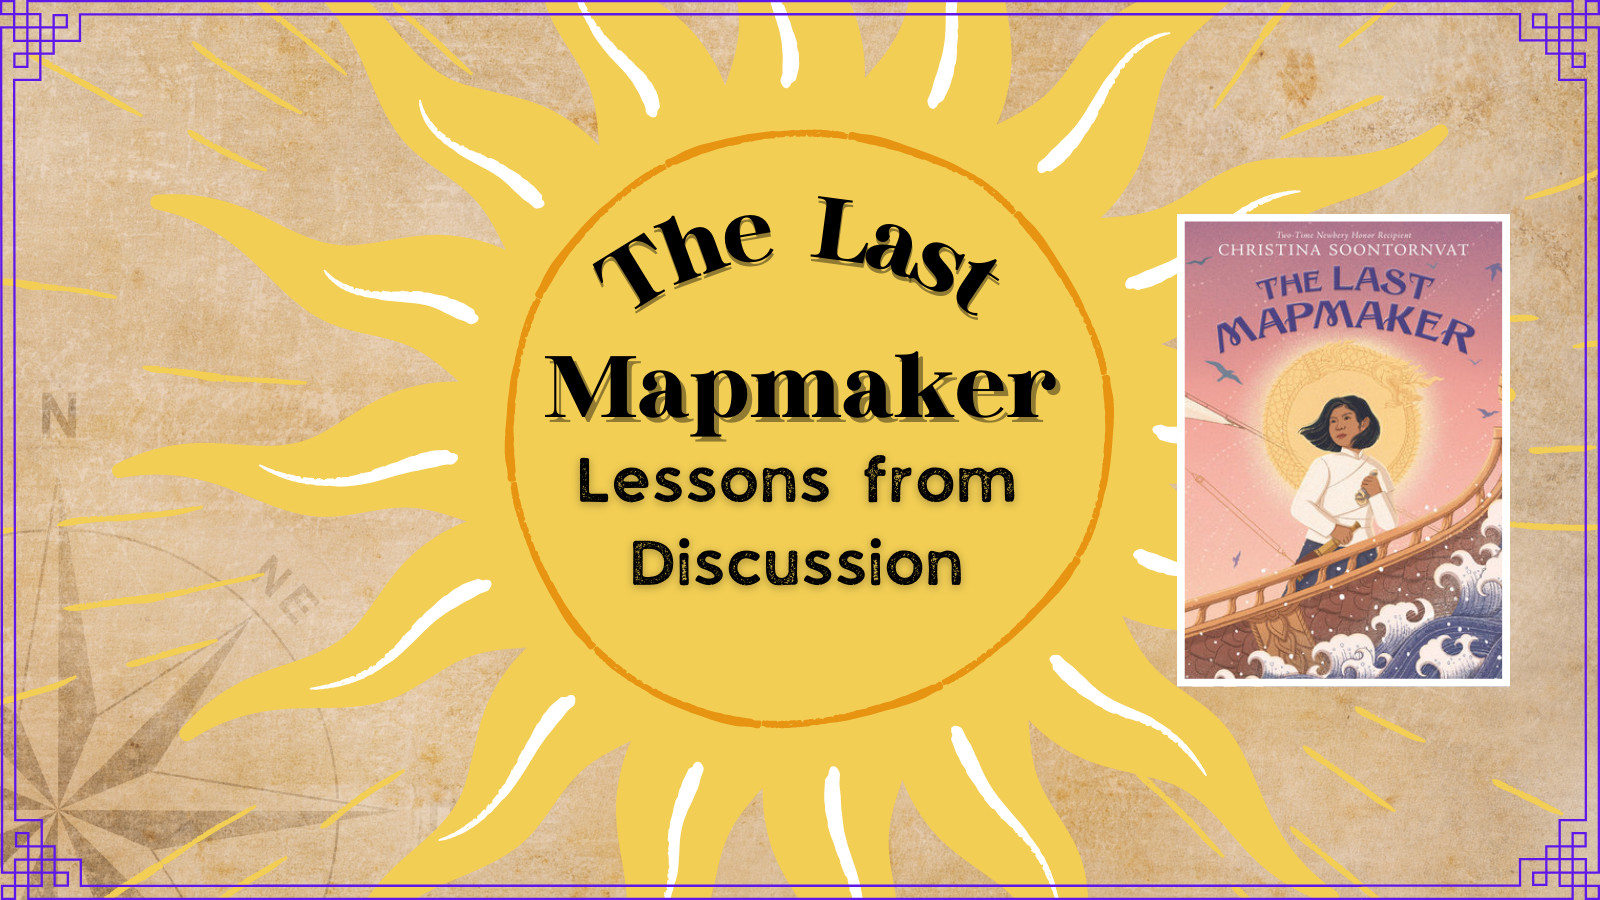 Lessons from The Last Mapmaker